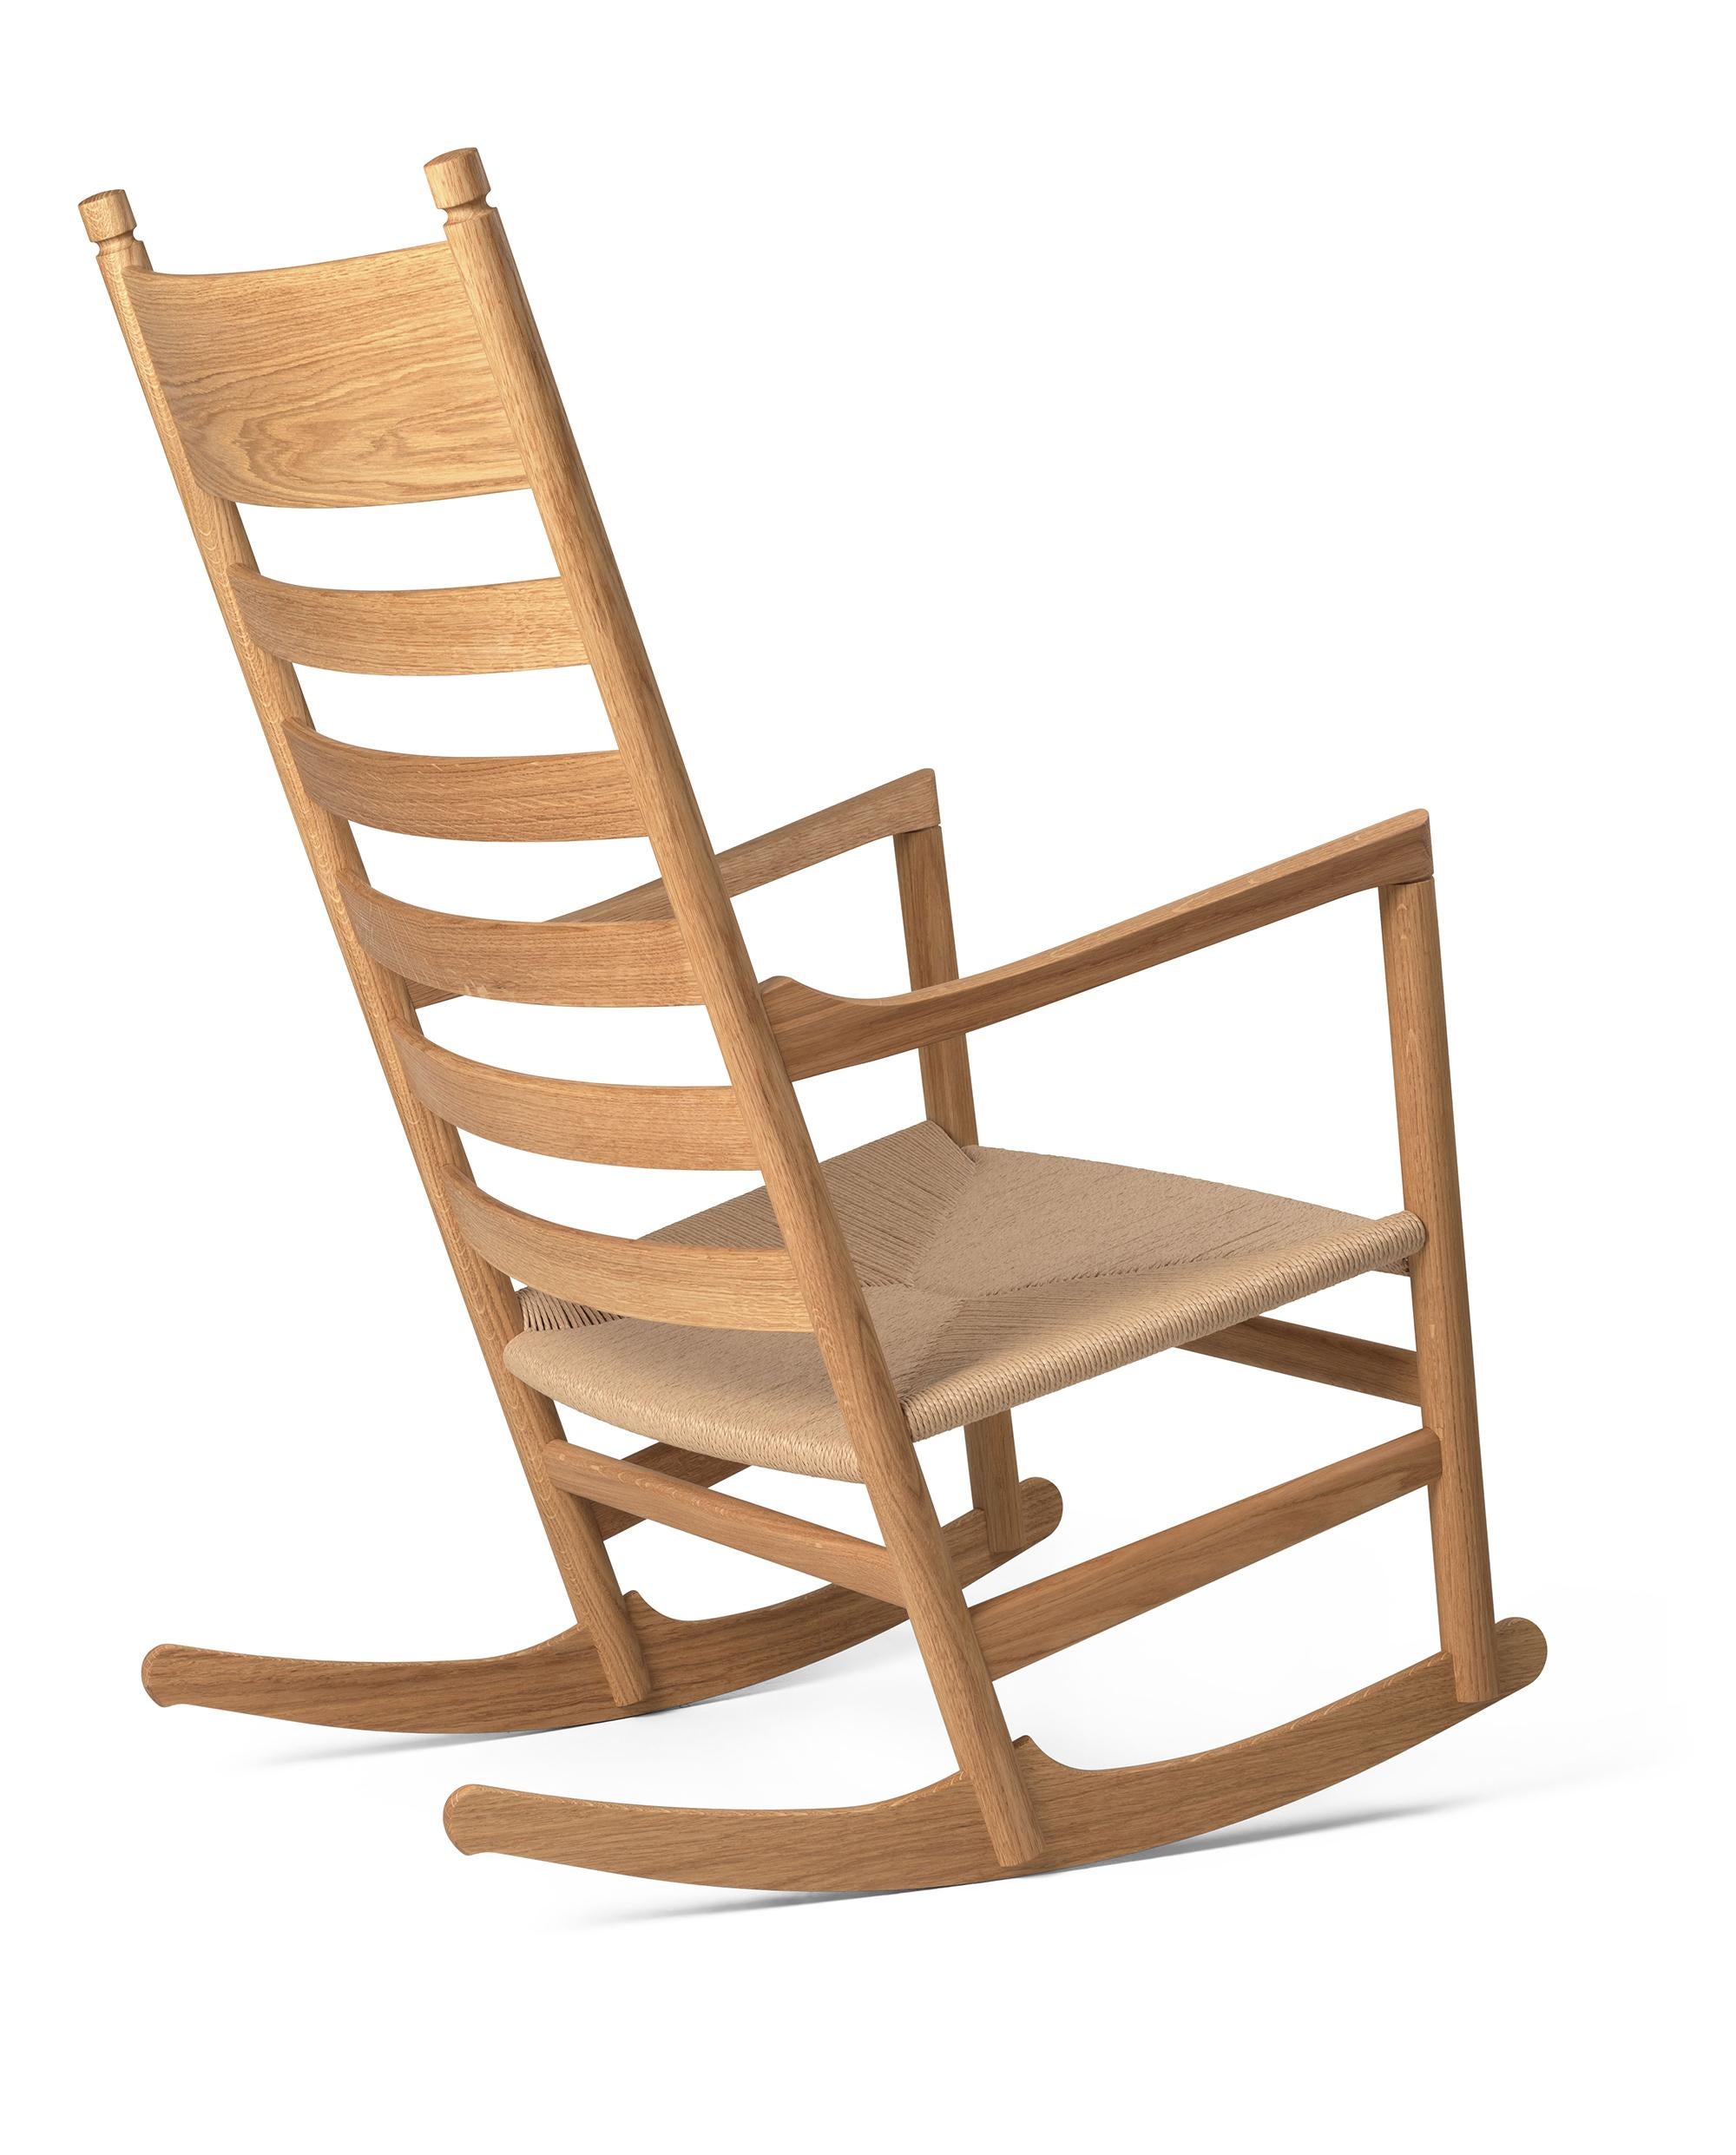 Hans J. Wegner 'CH45' Rocking Chair for Carl Hansen & Son in Oak Oil.

The story of Danish Modern begins in 1908 when Carl Hansen opened his first workshop. His firm commitment to beauty, comfort, refinement, and craftsmanship is evident in iconic